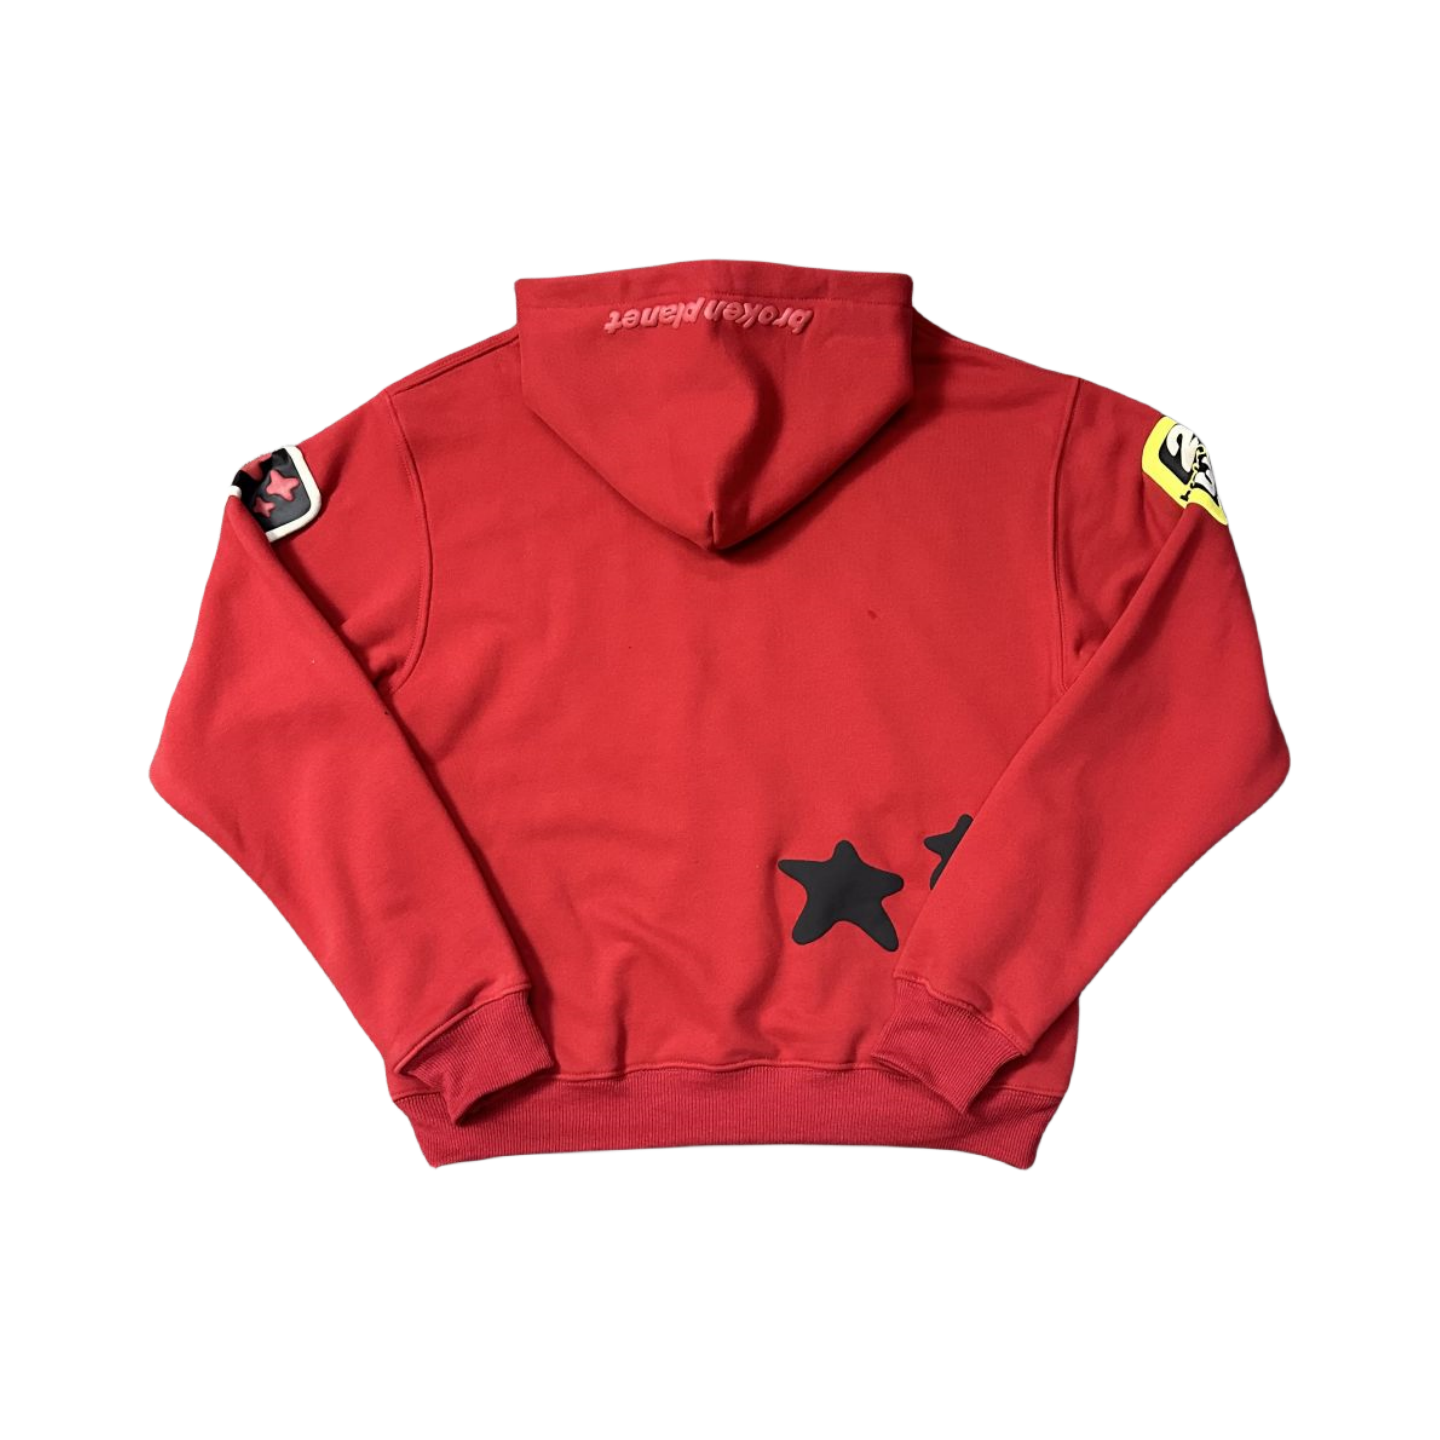 Broken Planet ‘brighter days are ahead’ Hoodie And Trousers Tracksuits Casual Streetwear Set - Red